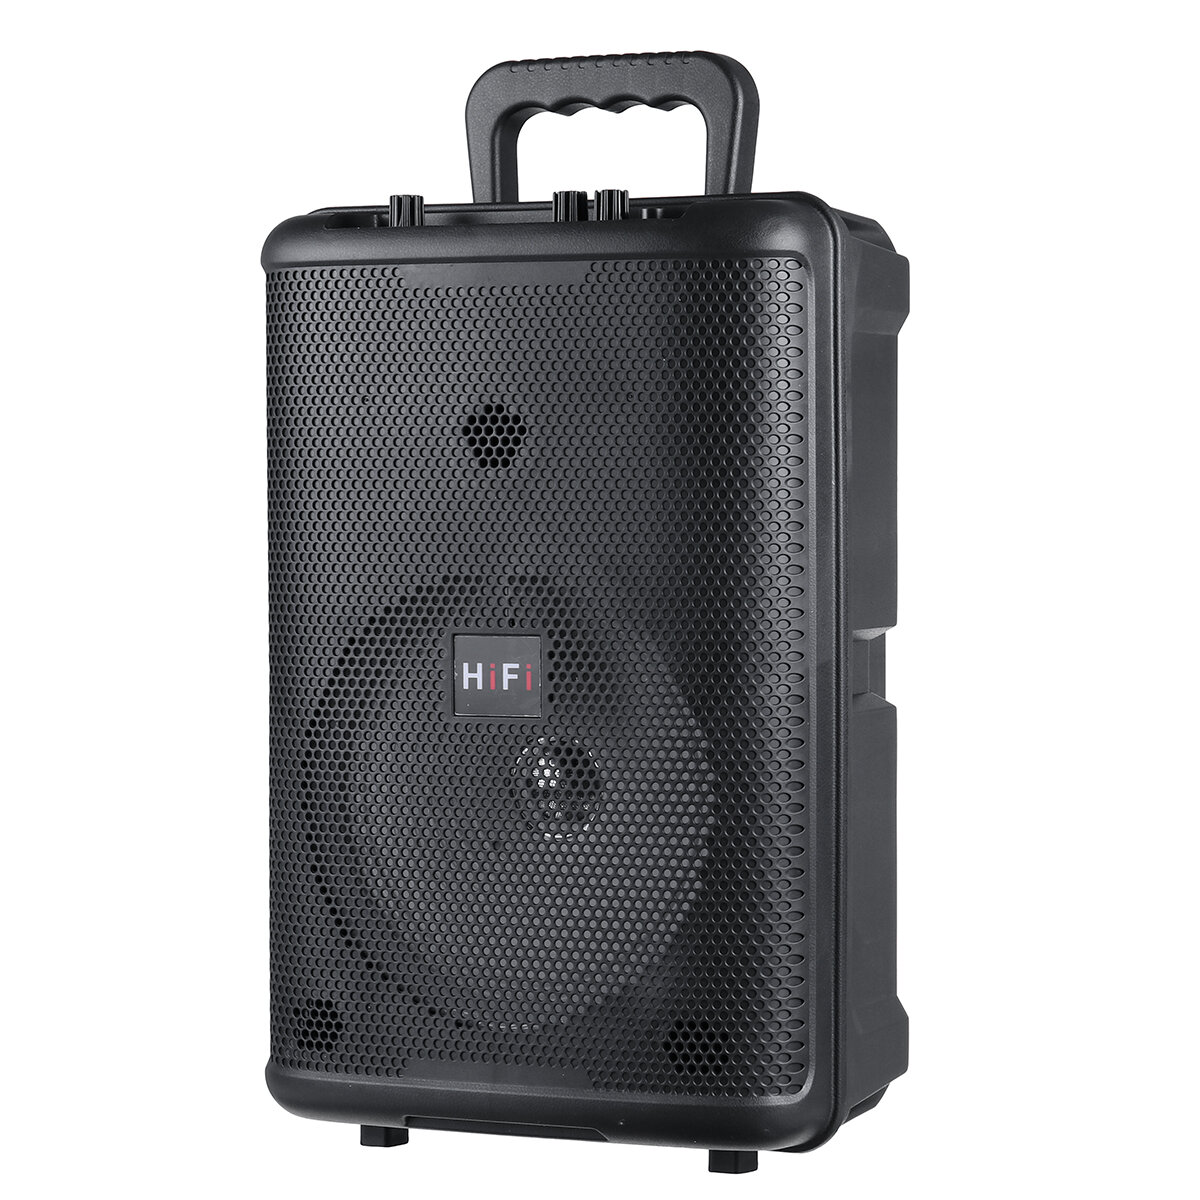 8 inch 20W High Power bluetooth Sound Square Loud Speaker 1800mAh Outdoor Singing Subwoofer with HD Mic